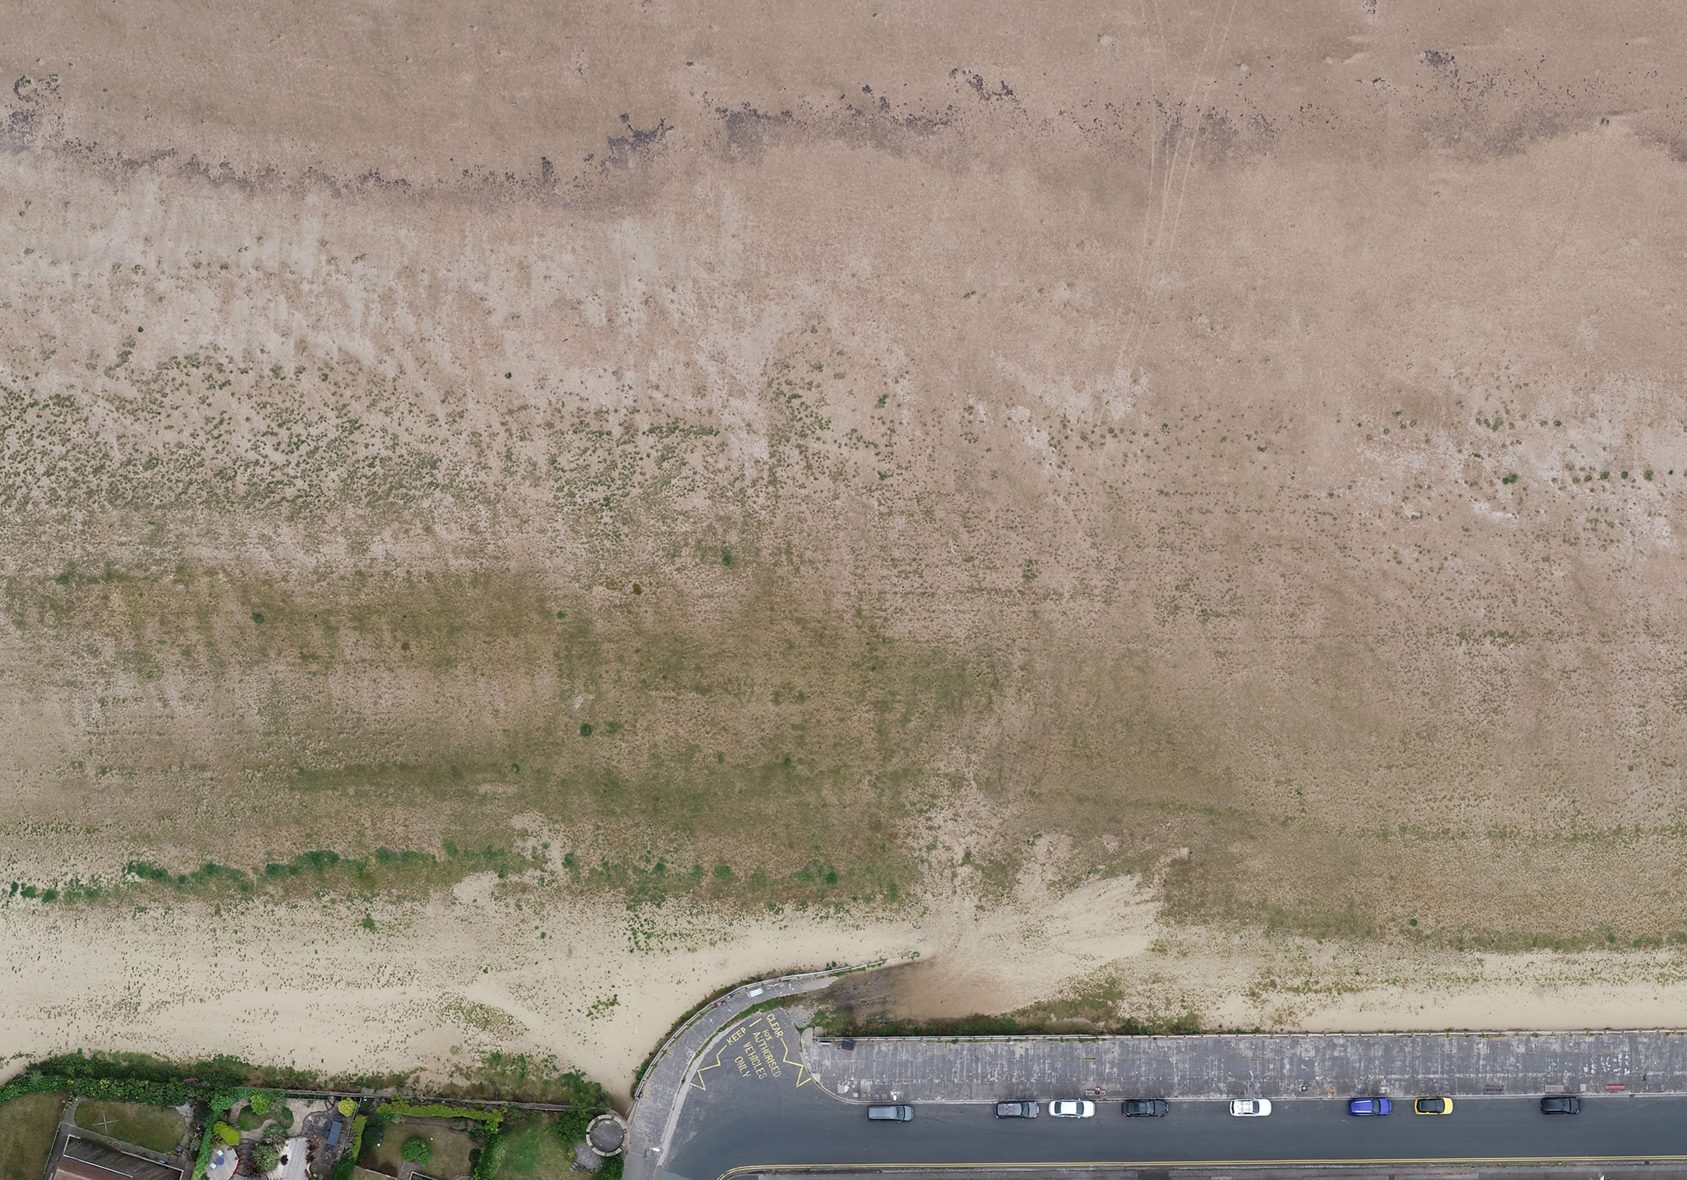 At Kings Gap slipway we can see from above the darker ‘plume’ where sand is wetter and feeding vegetation.